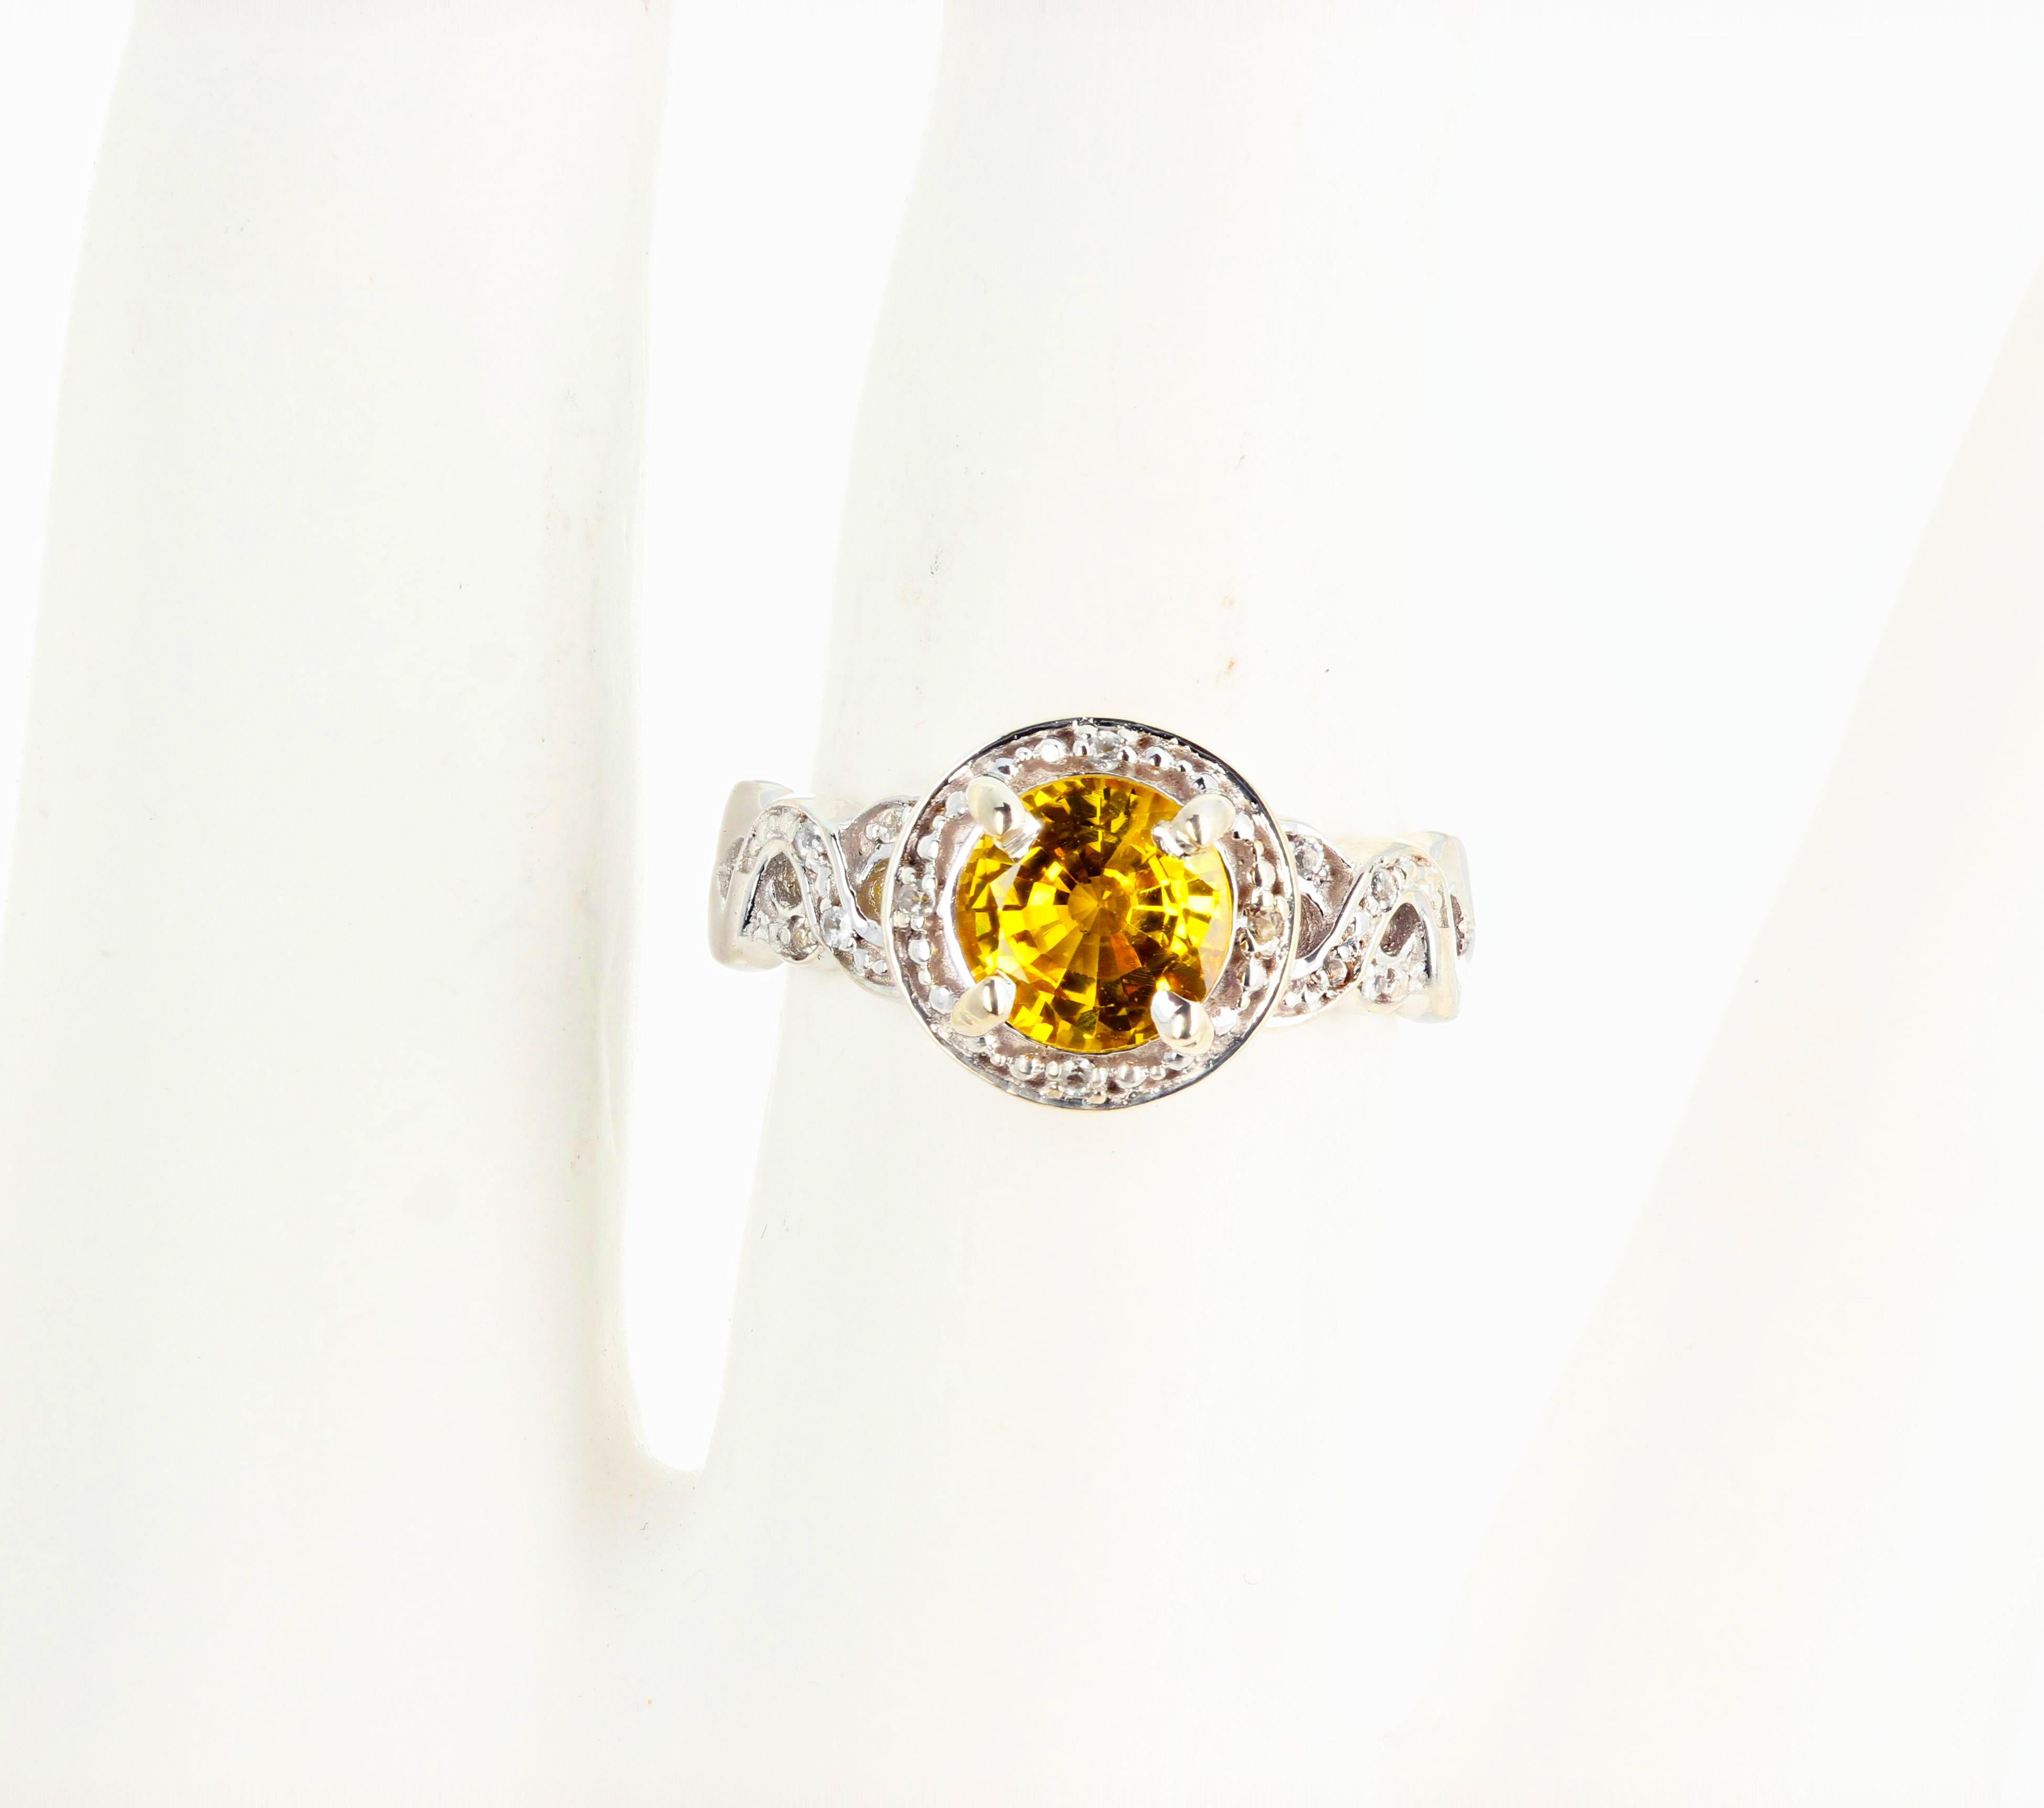 AJD Brilliantly Sparkling 1.3 Ct Canary Yellow Spinel & Diamonds Ring For Sale 1